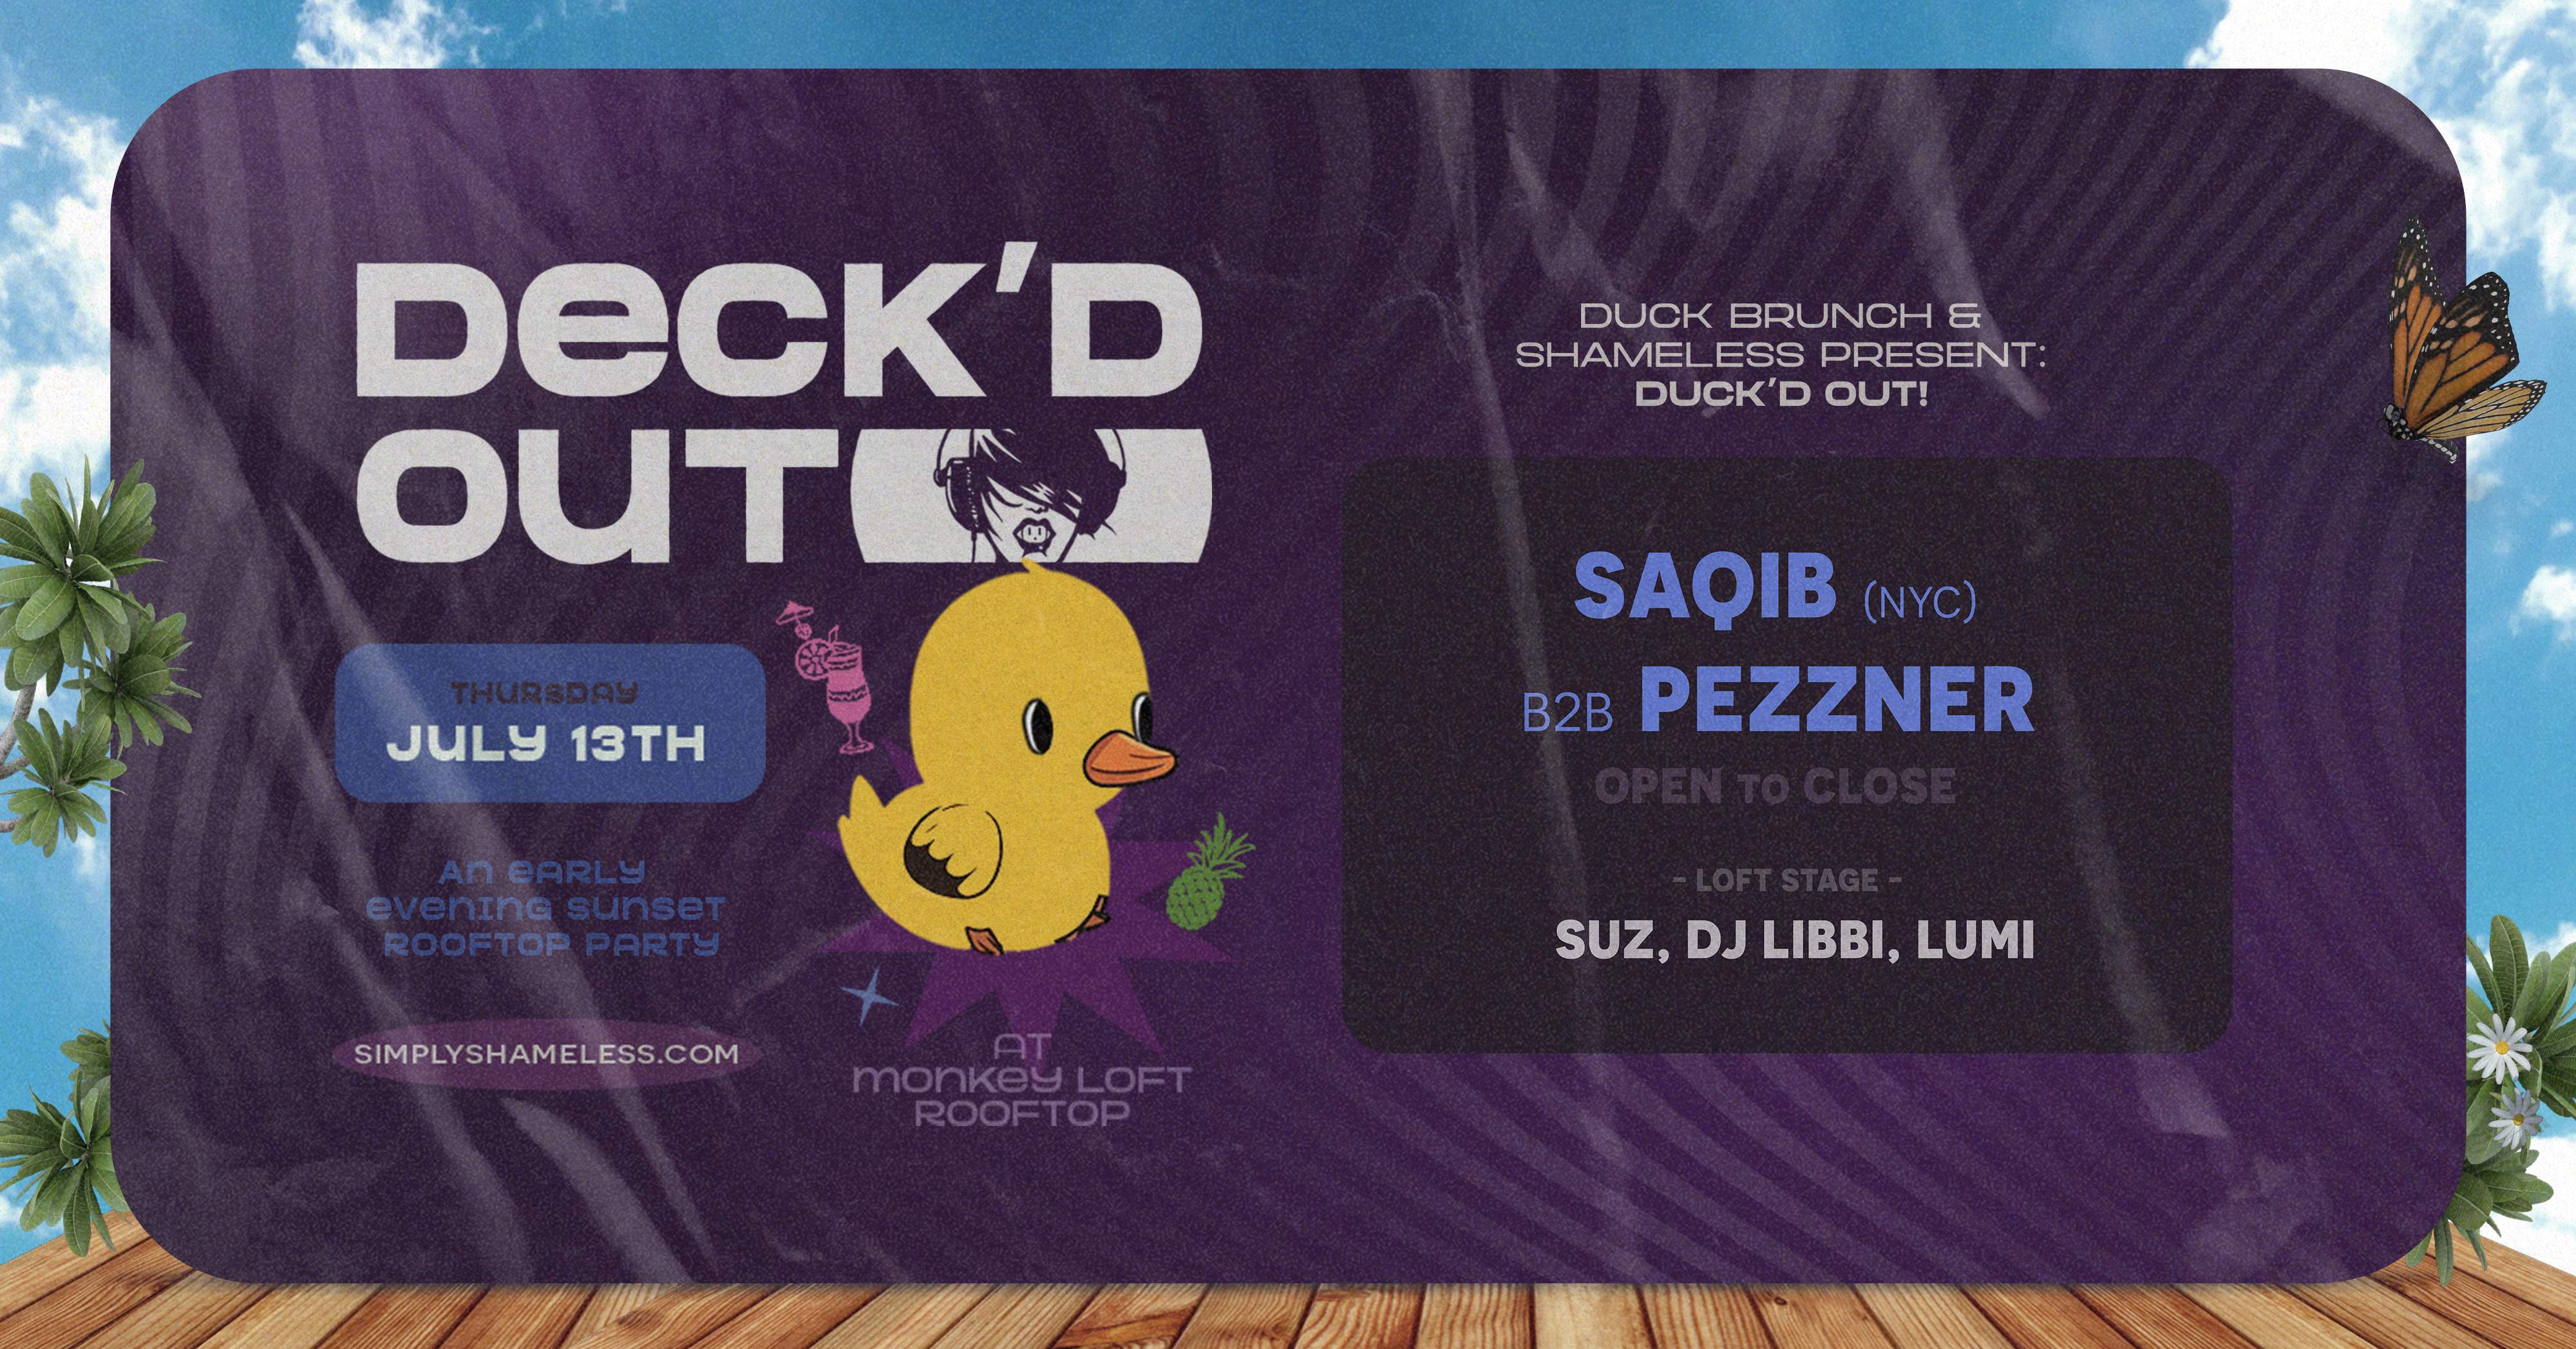 Duck'd Out #3 with Saqib (NYC) B2B Pezzner Open to Close + more - Página frontal